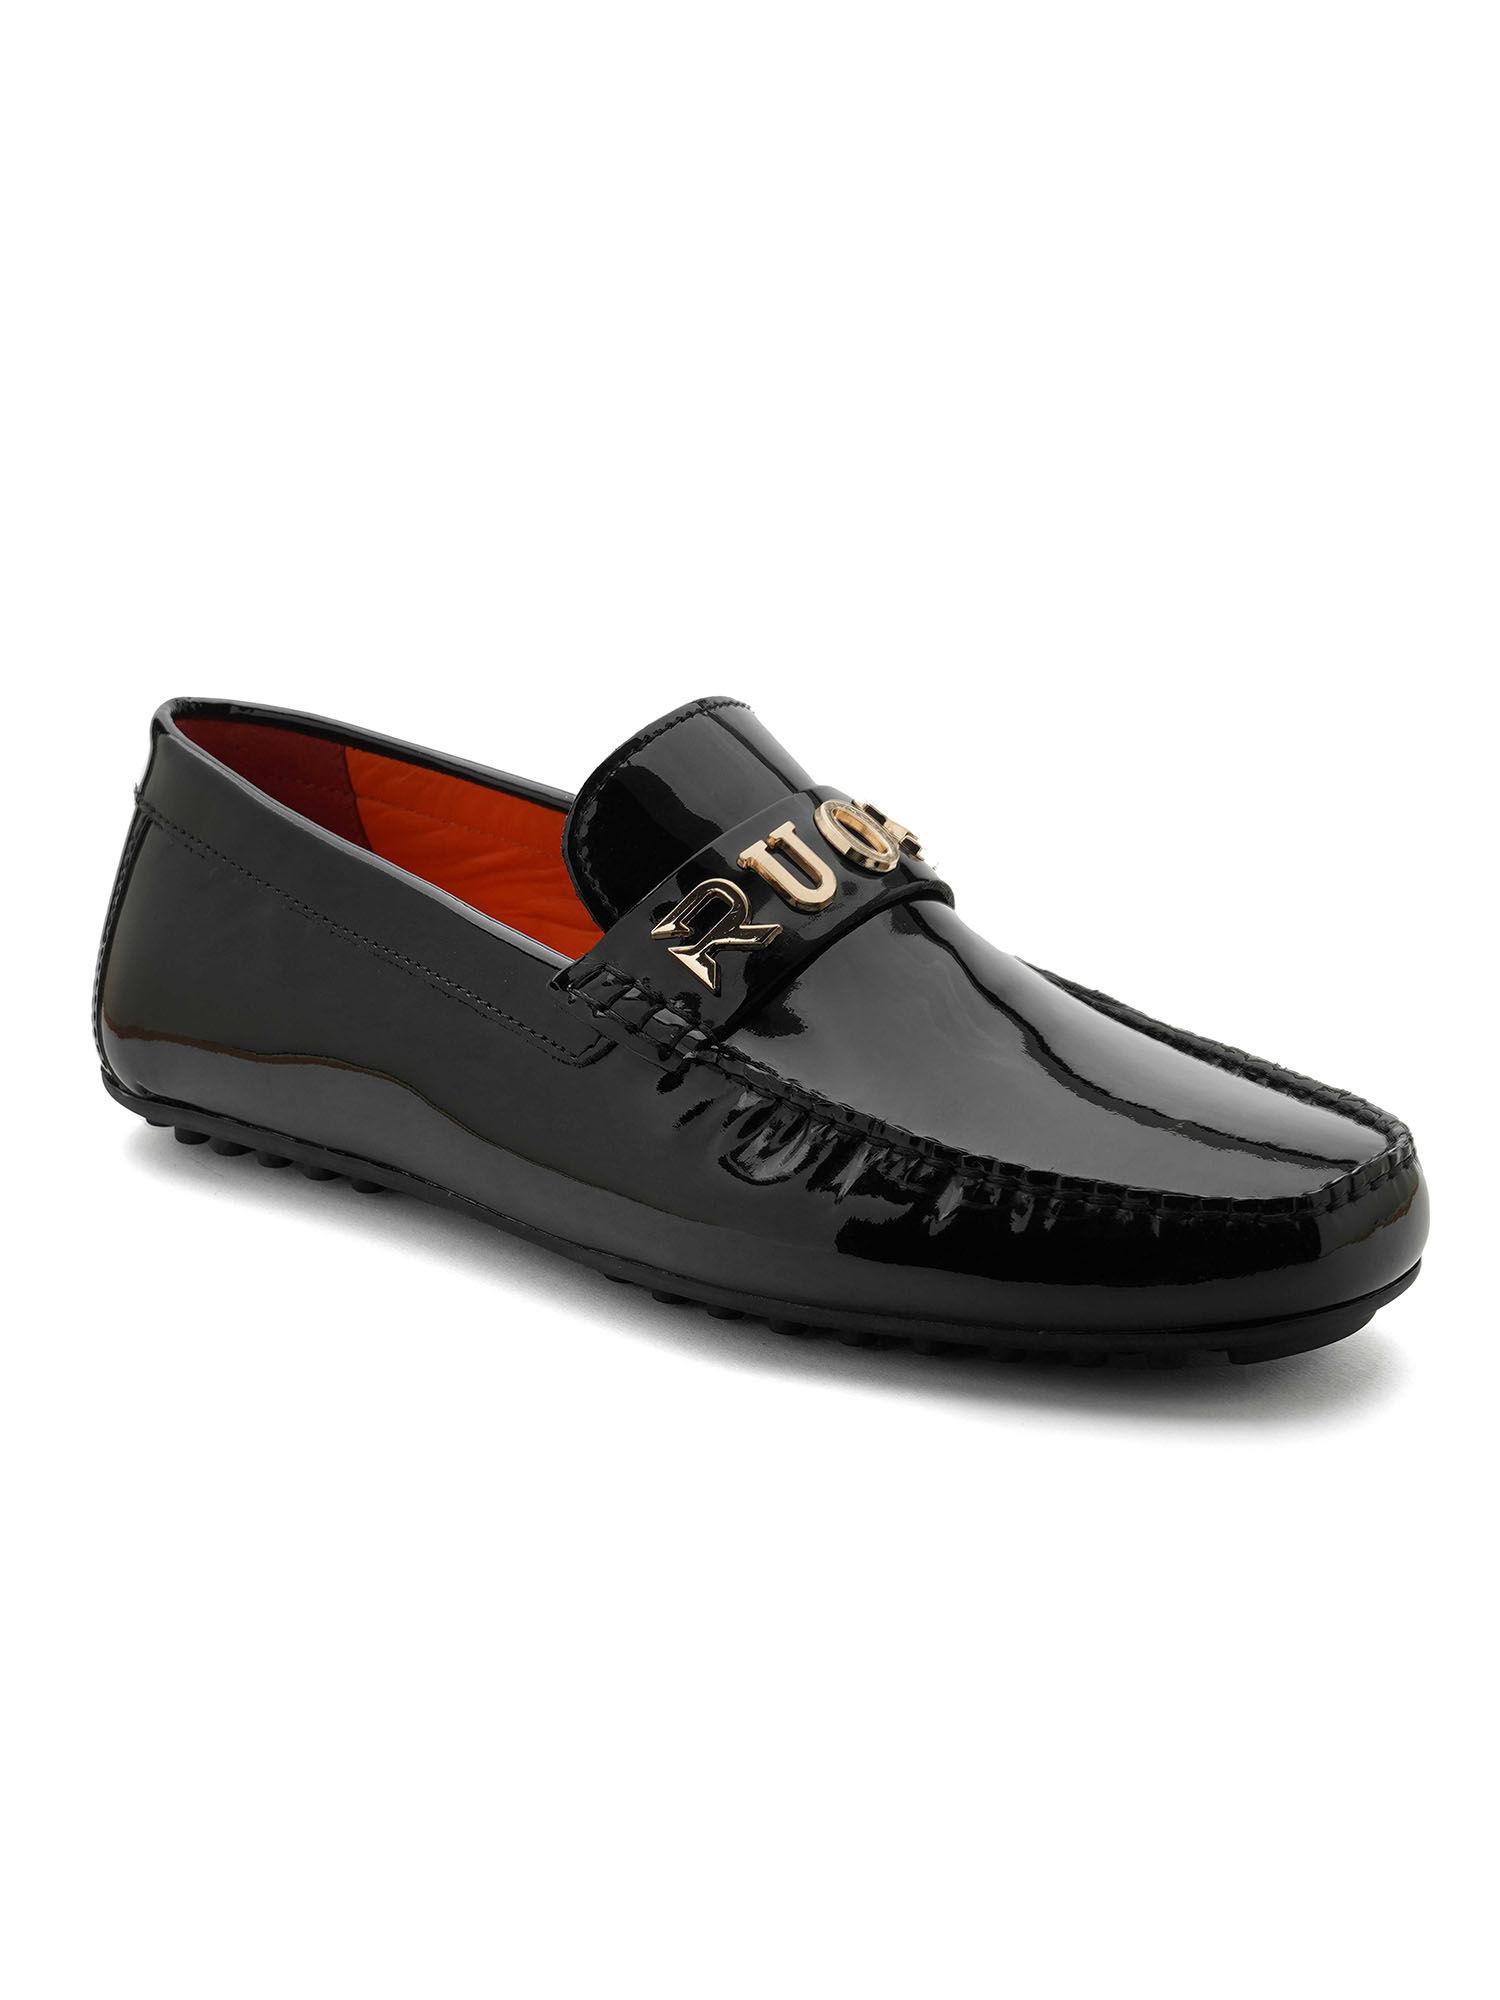 black driver casual loafers for men